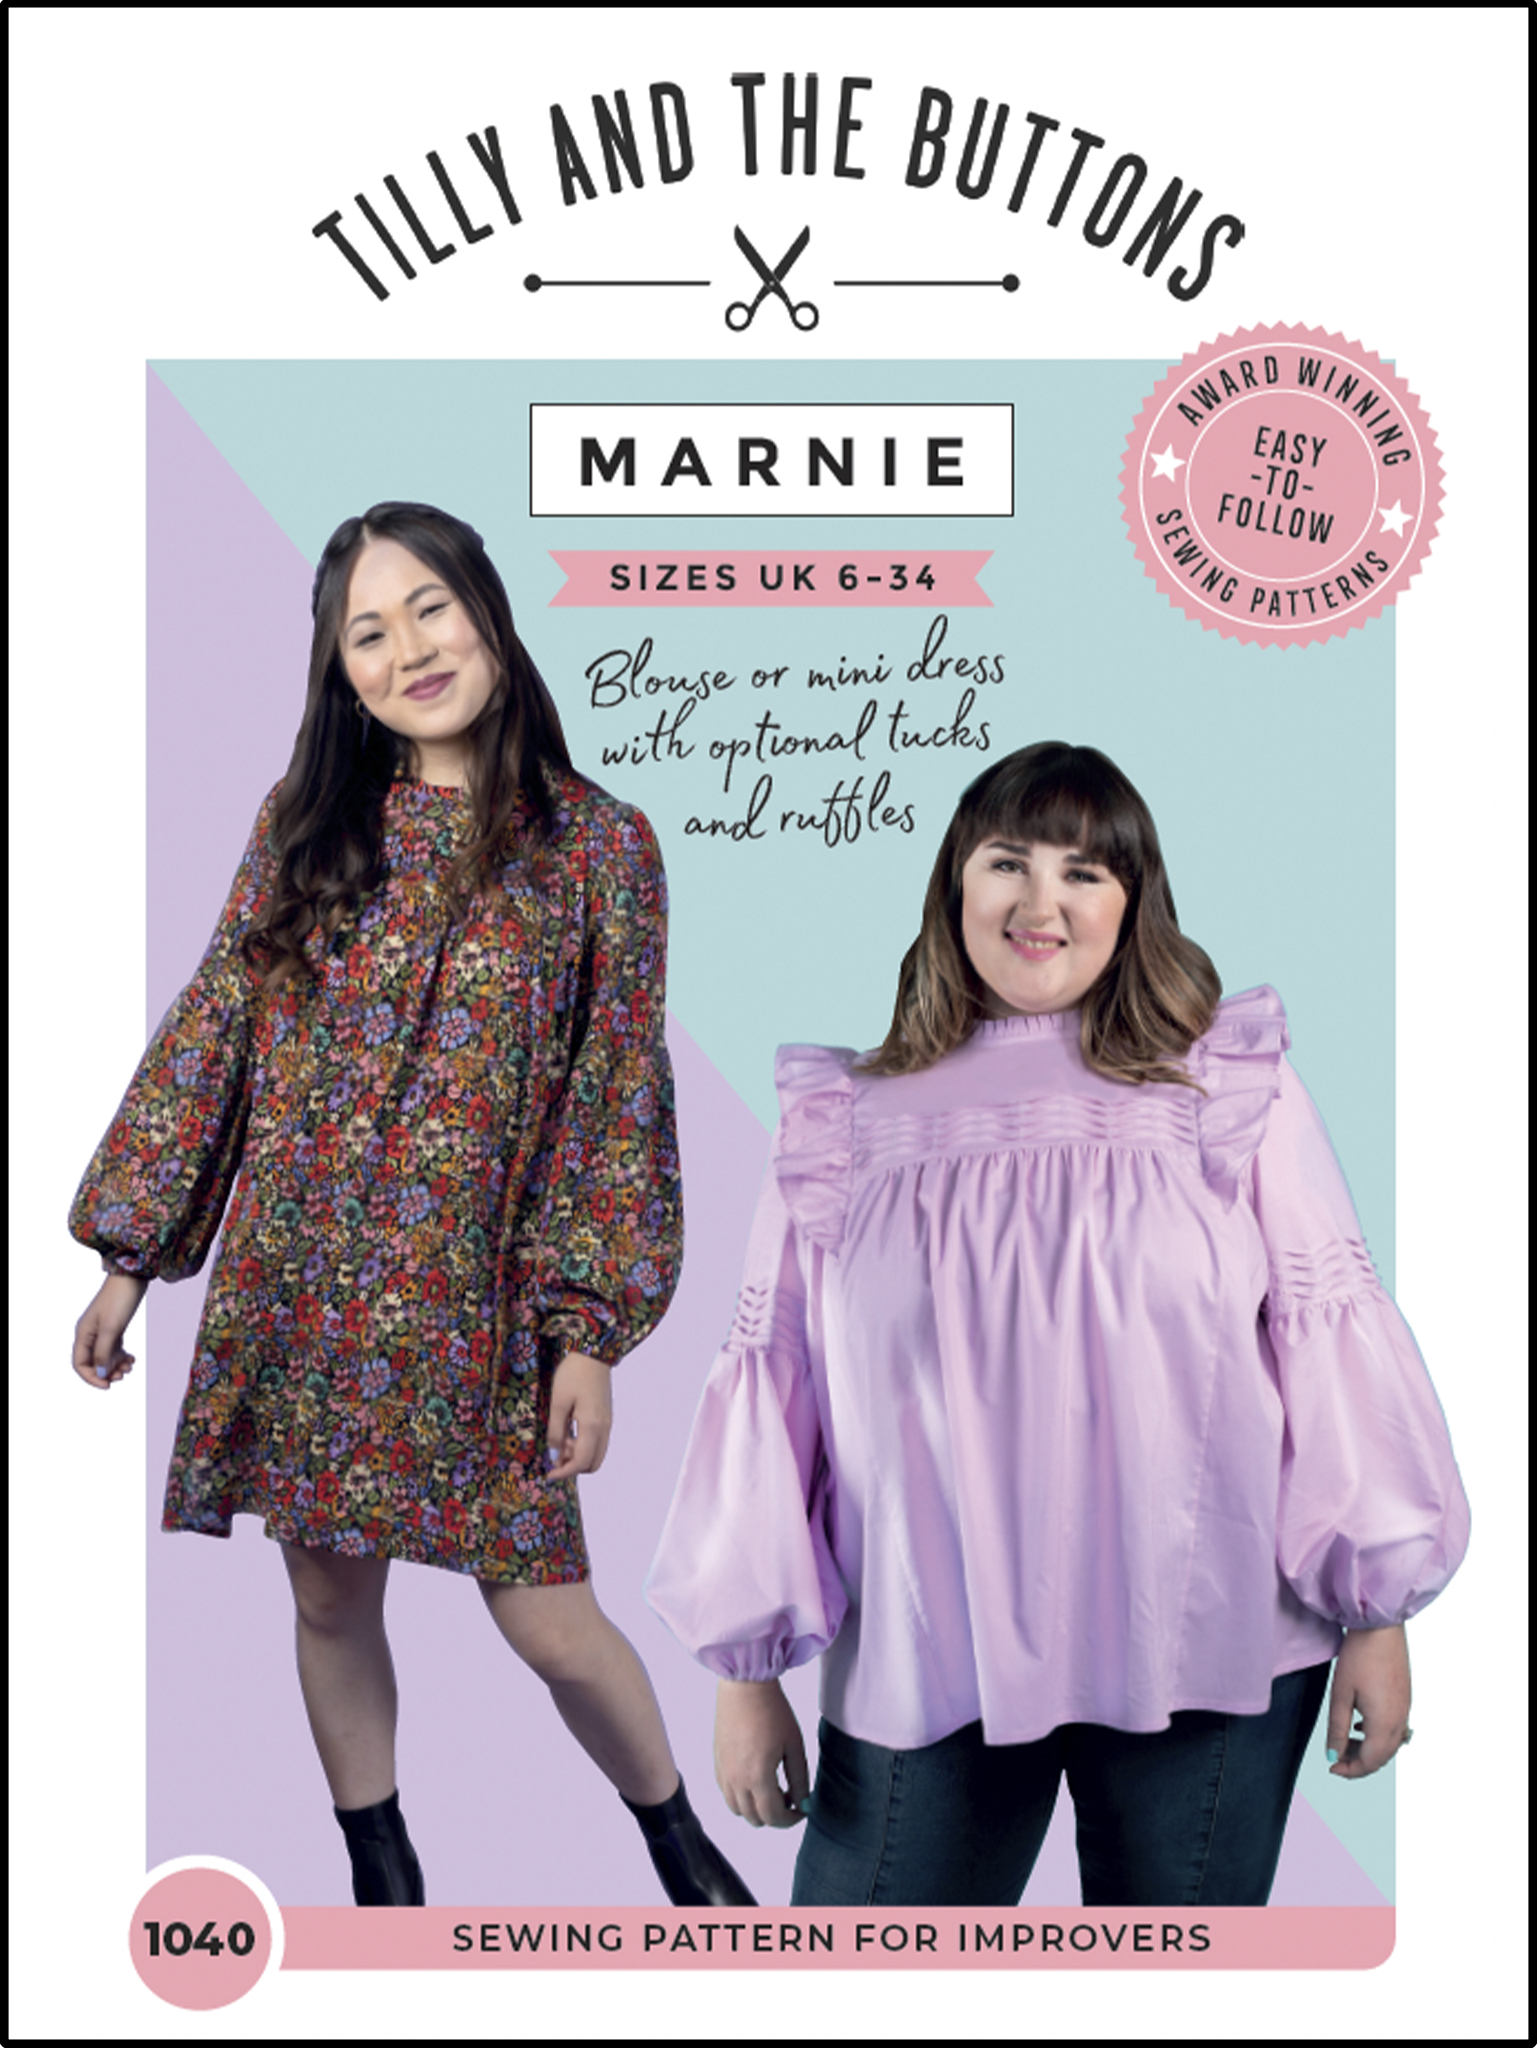 Sewing Kit - Marnie Blouse and Mini Dress in Watercolour Blooms Cotton Lawn